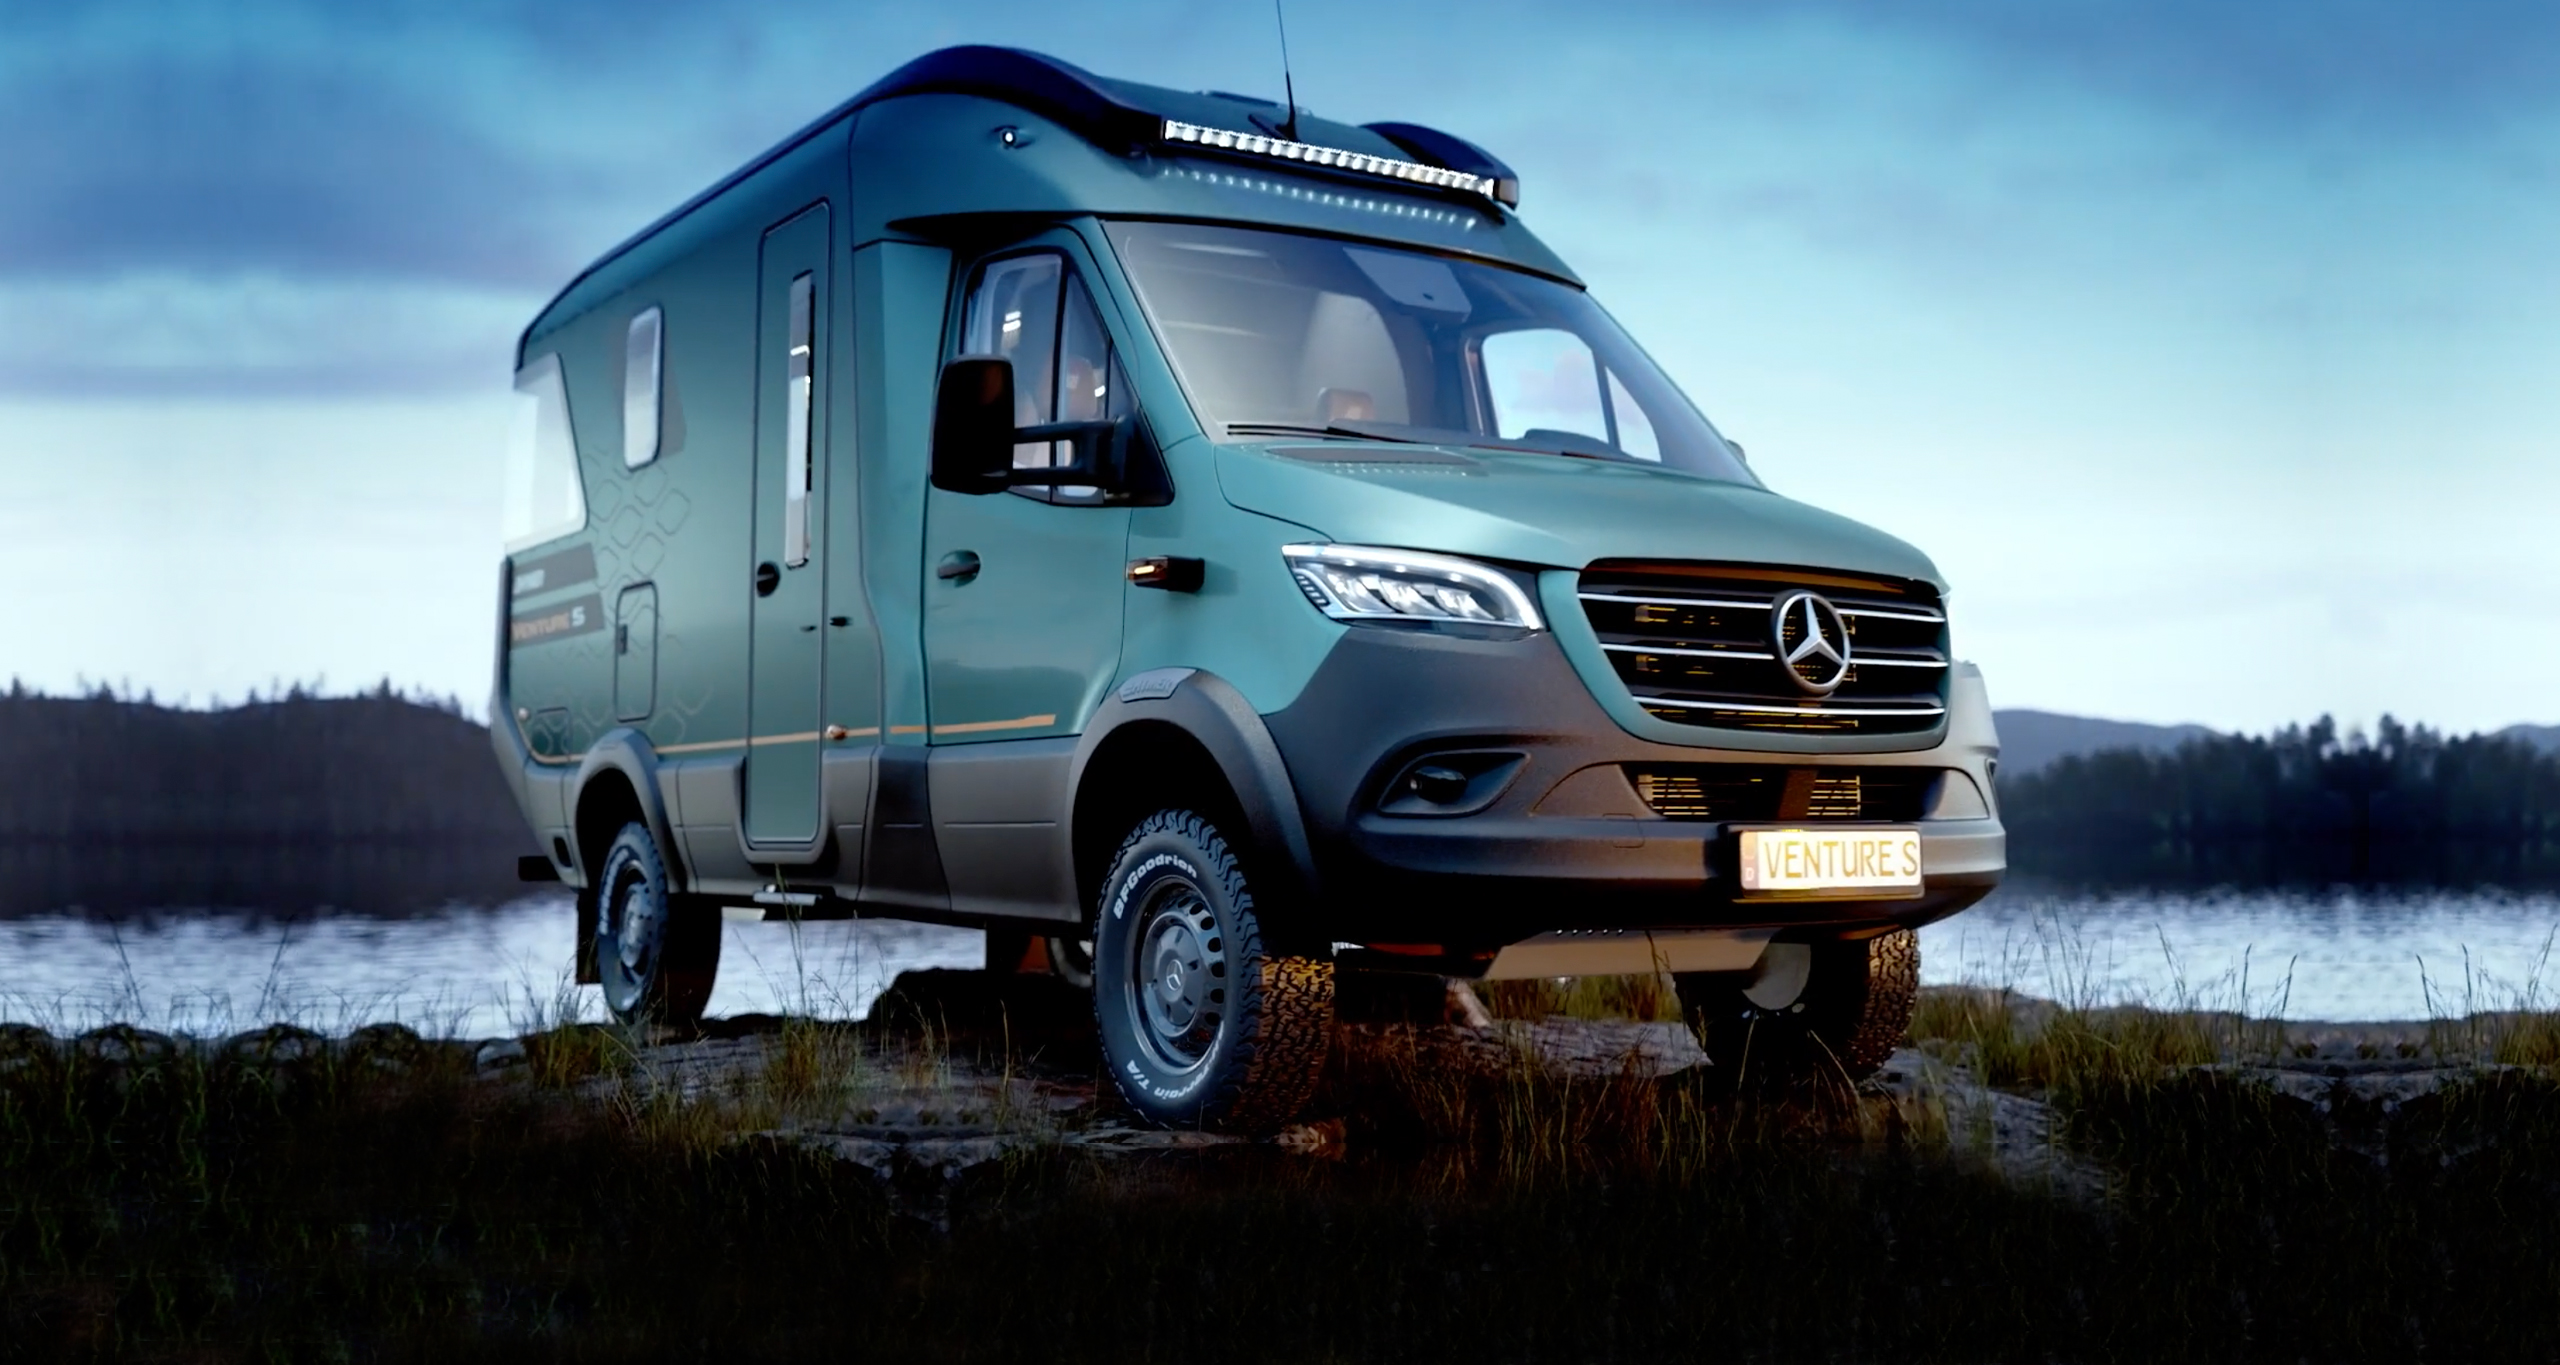 The Digital-First Recreational Vehicle: Siemens Xcelerator Software helps  to bring Hymer's first concept car Venture S to life